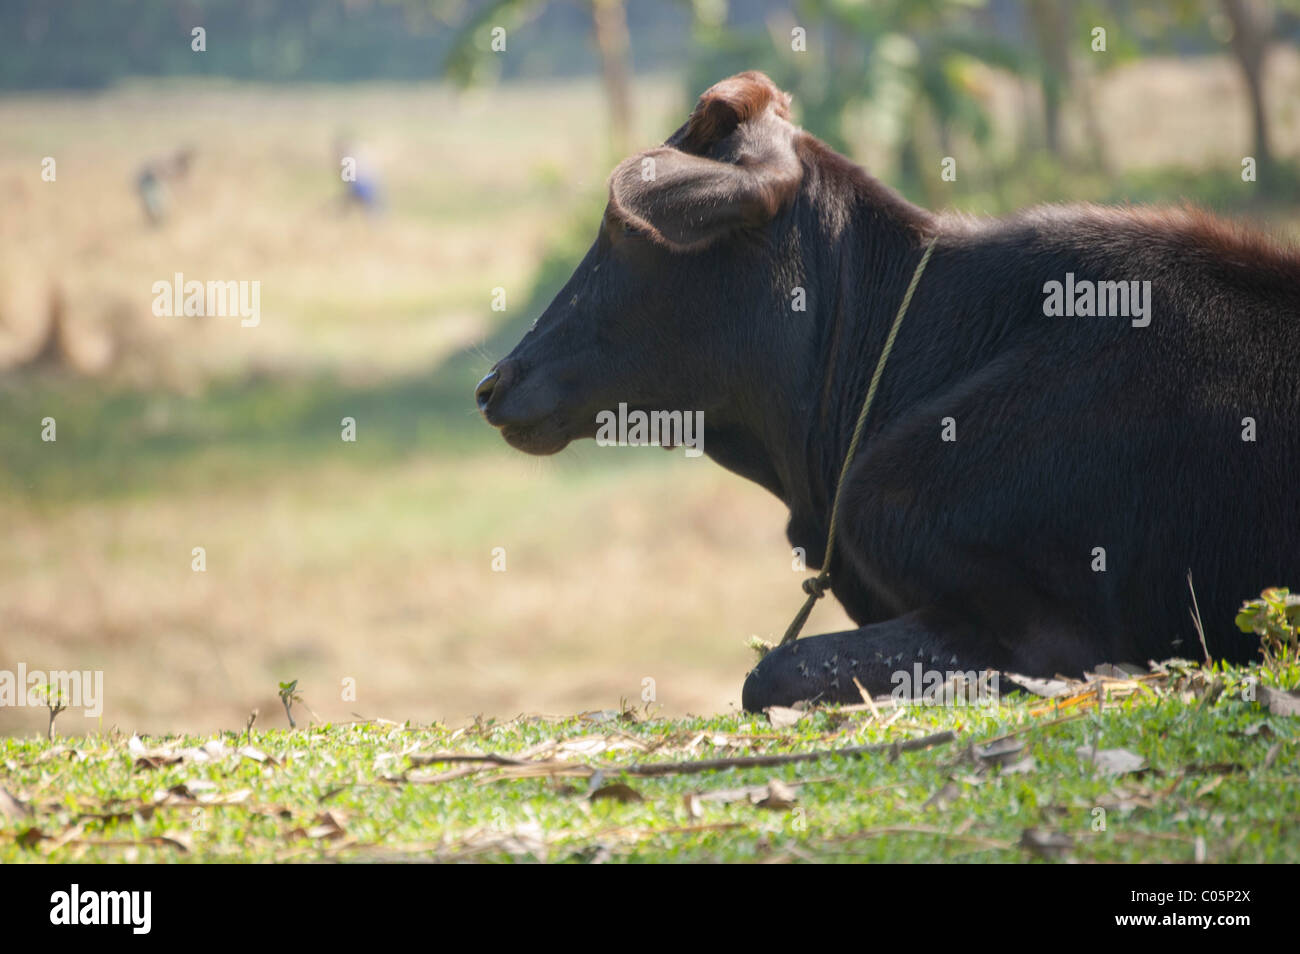 Profile of a cow sitting on a hillside with two people working in a field in the background in a Bangladeshi village. Stock Photo